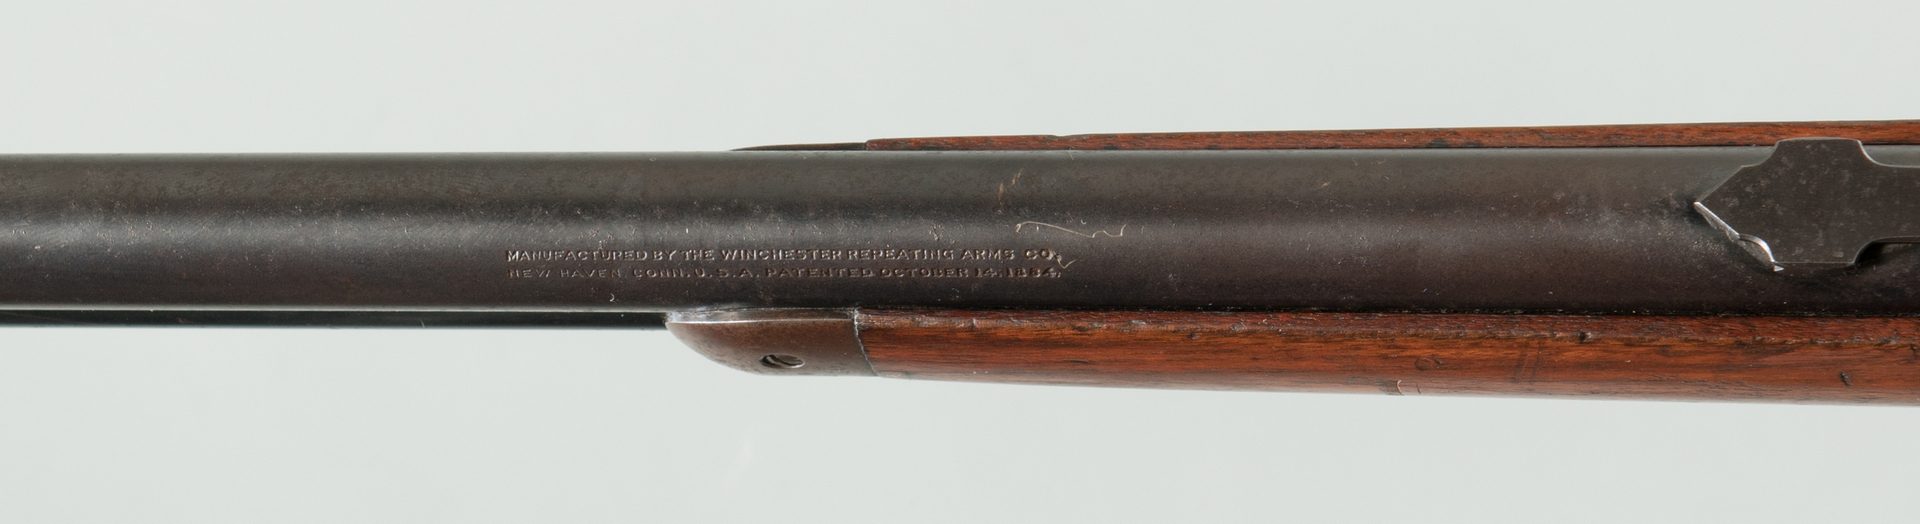 Lot 798: Winchester Model 1892, 25-20 Lever Action Rifle